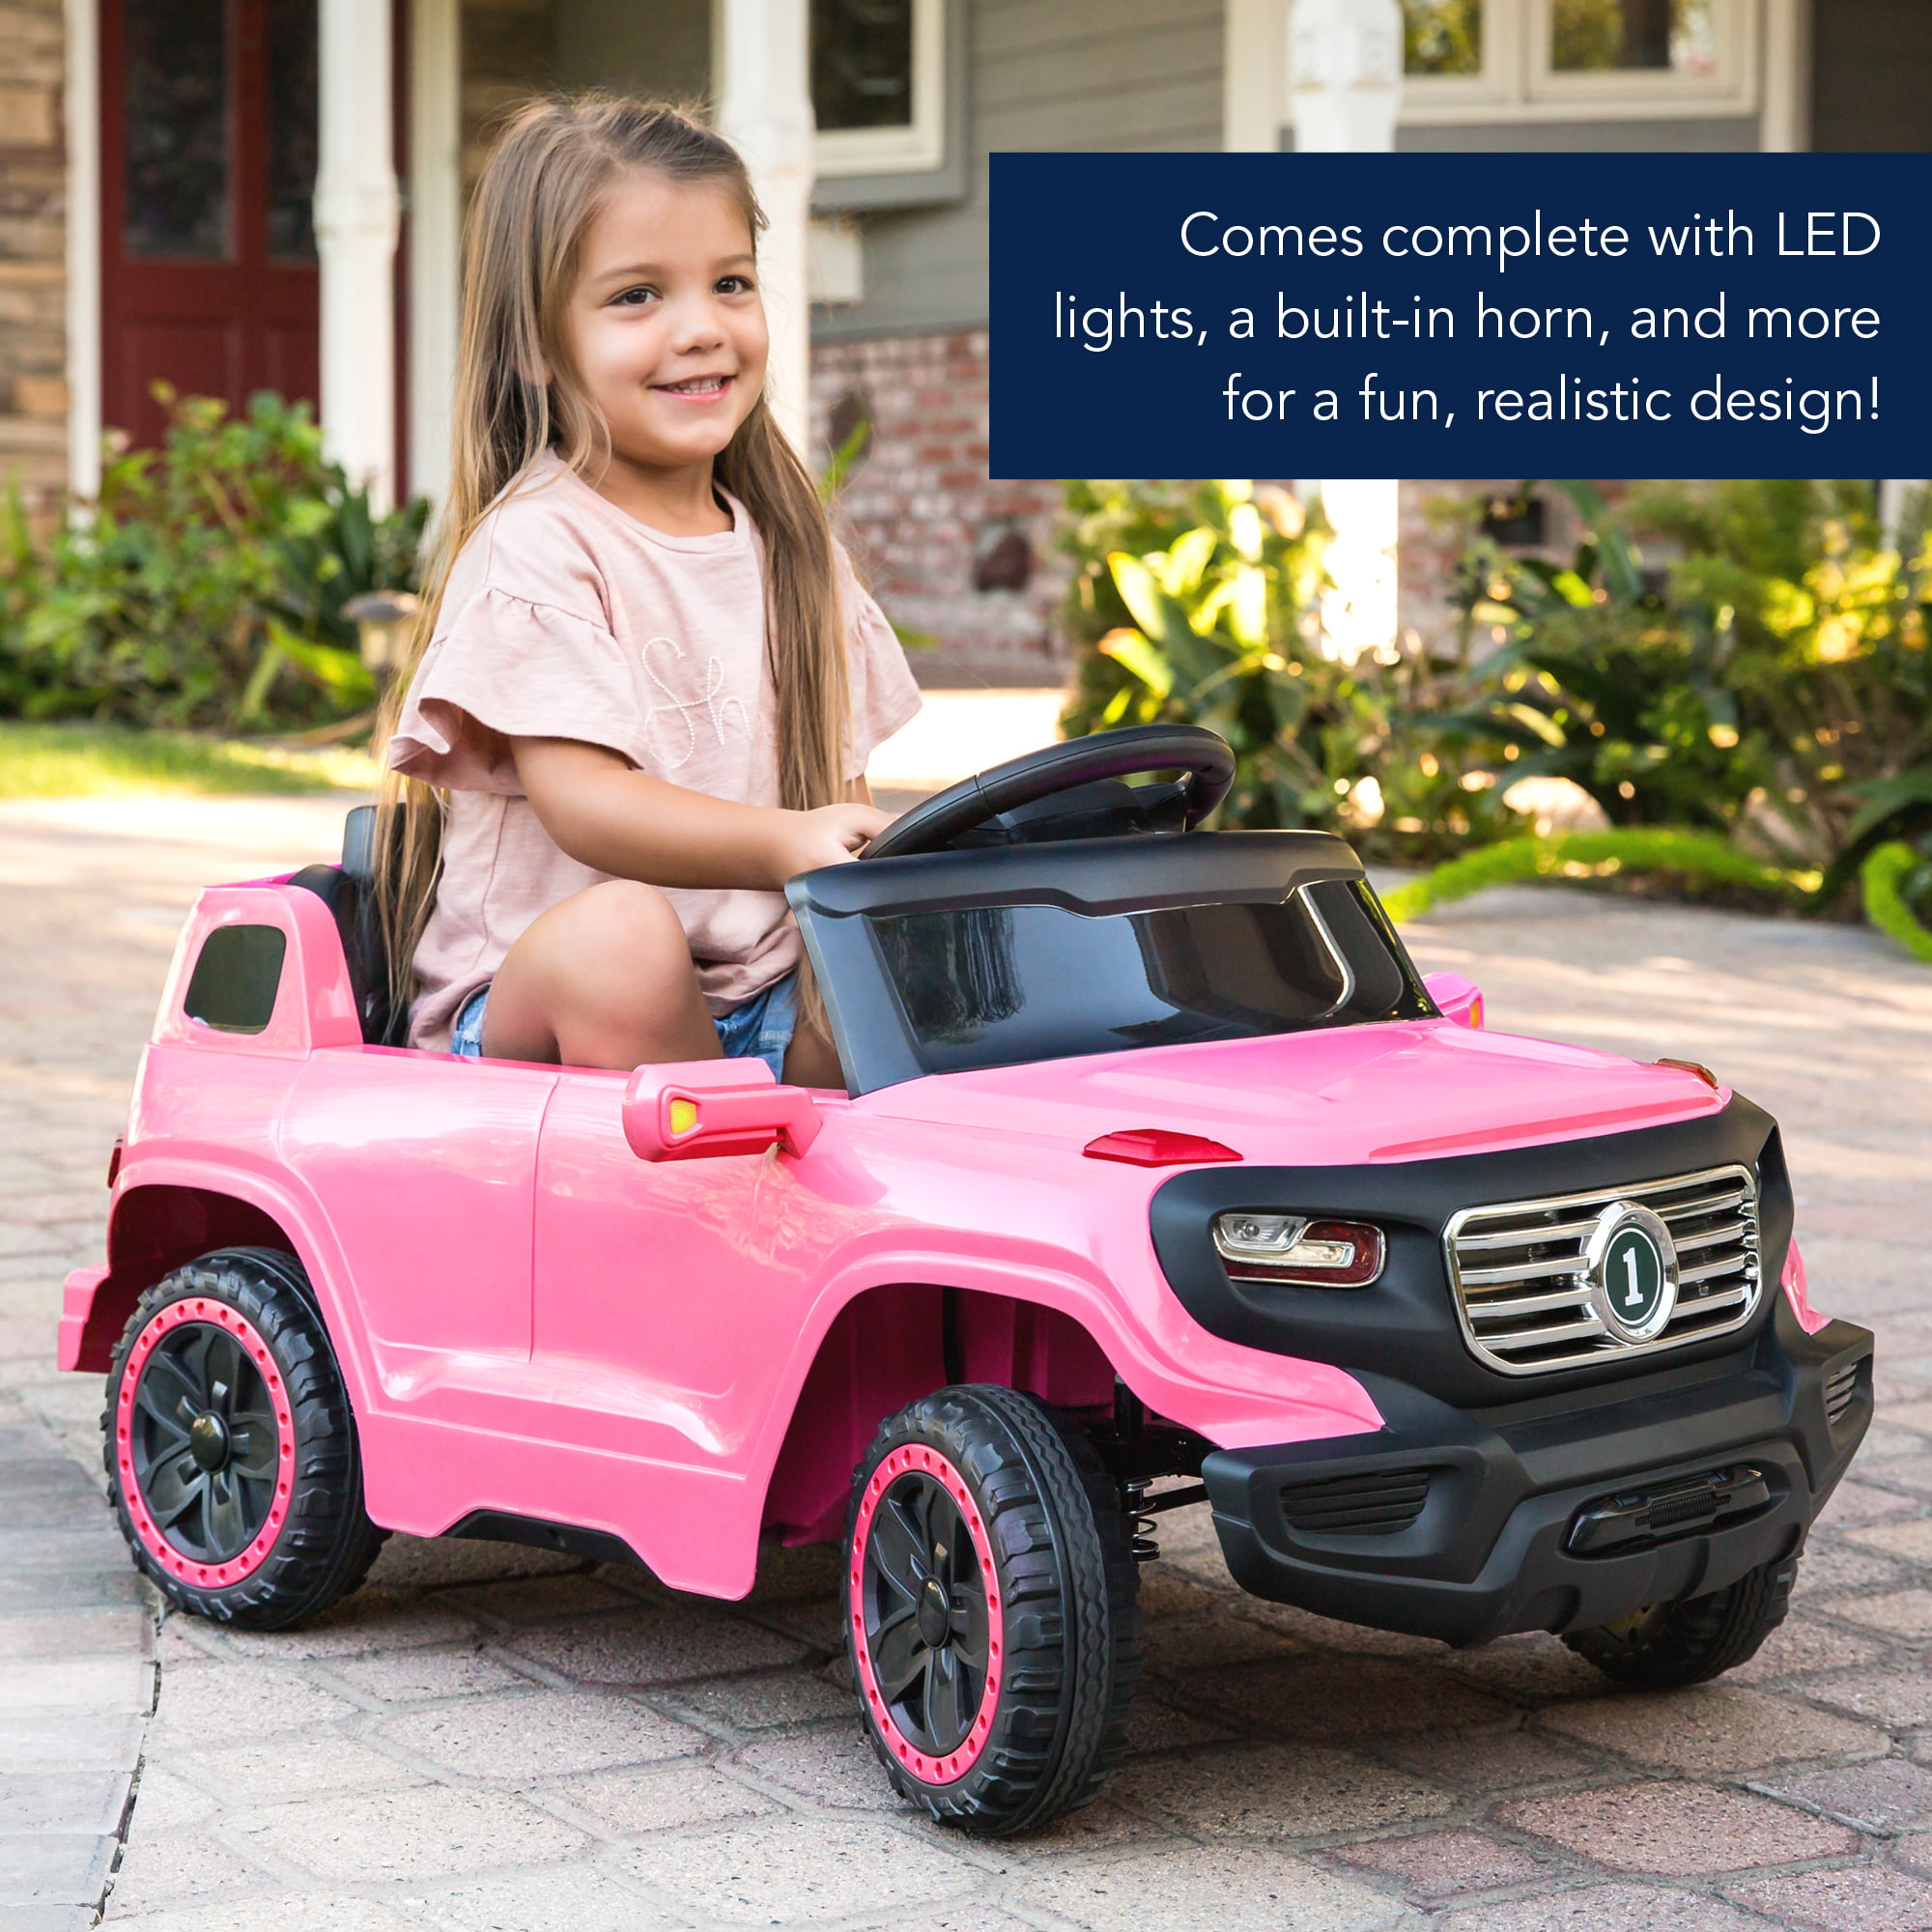 Best Choice Products 6V Kids Ride On Car Truck w/ Parent Control, 3 Speeds, LED Headlights, MP3 Player, Horn - Pink - image 2 of 7